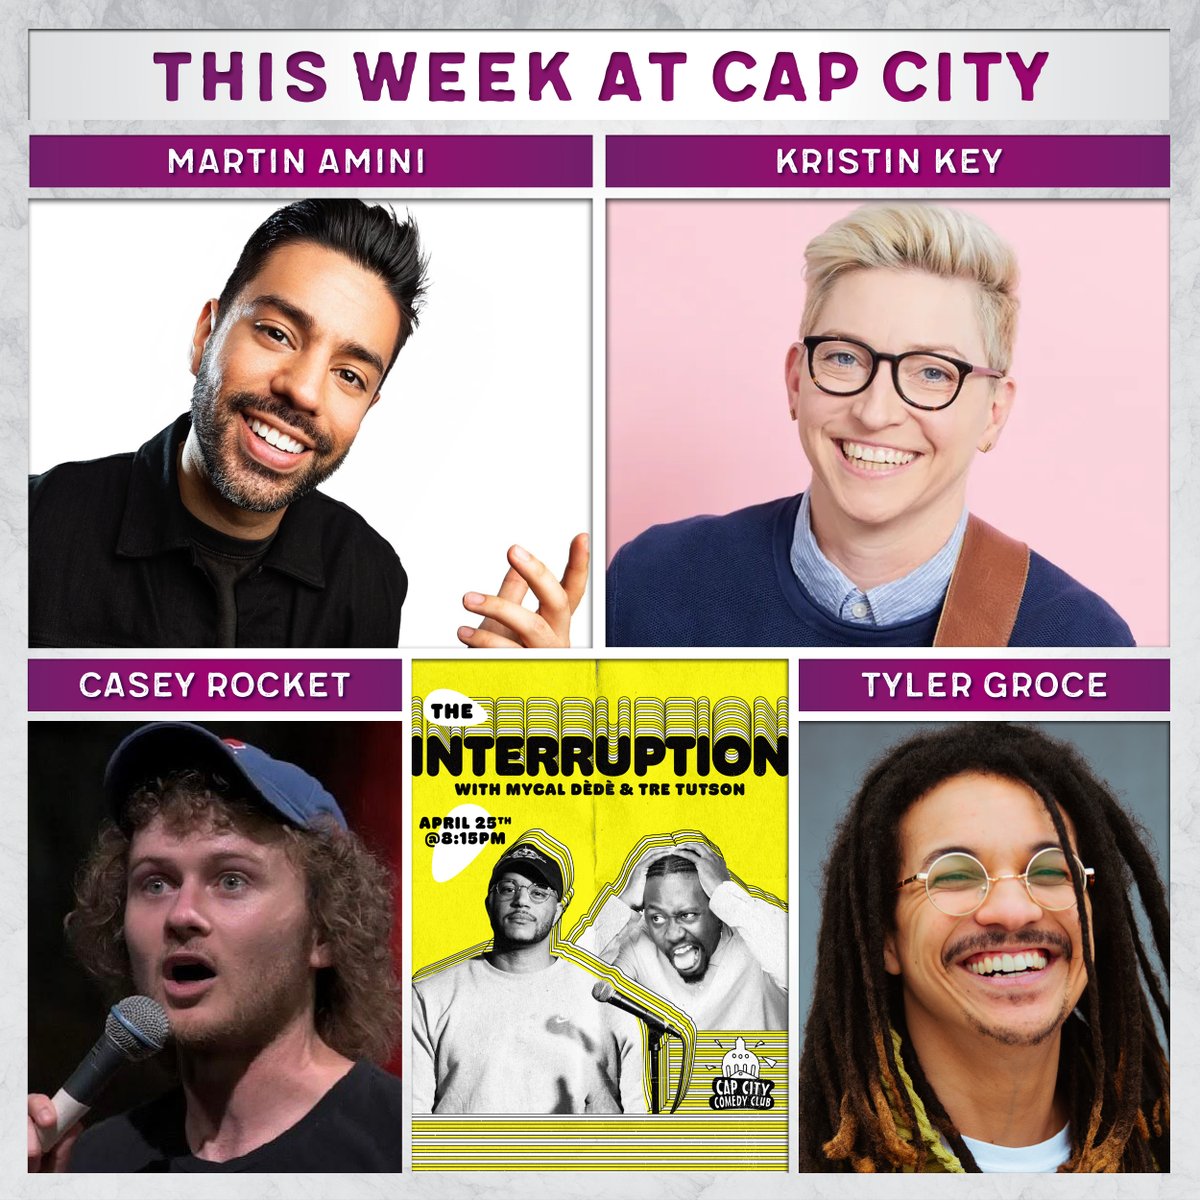 This Week at Cap City | @MCdooglebear, @MartinAmini, with Mycal Dede & Tre Tutson and @tylergroce1 in the Red Room, + @thekristinkey headlines the weekend! Grab your tickets now: bit.ly/3hTxS3n